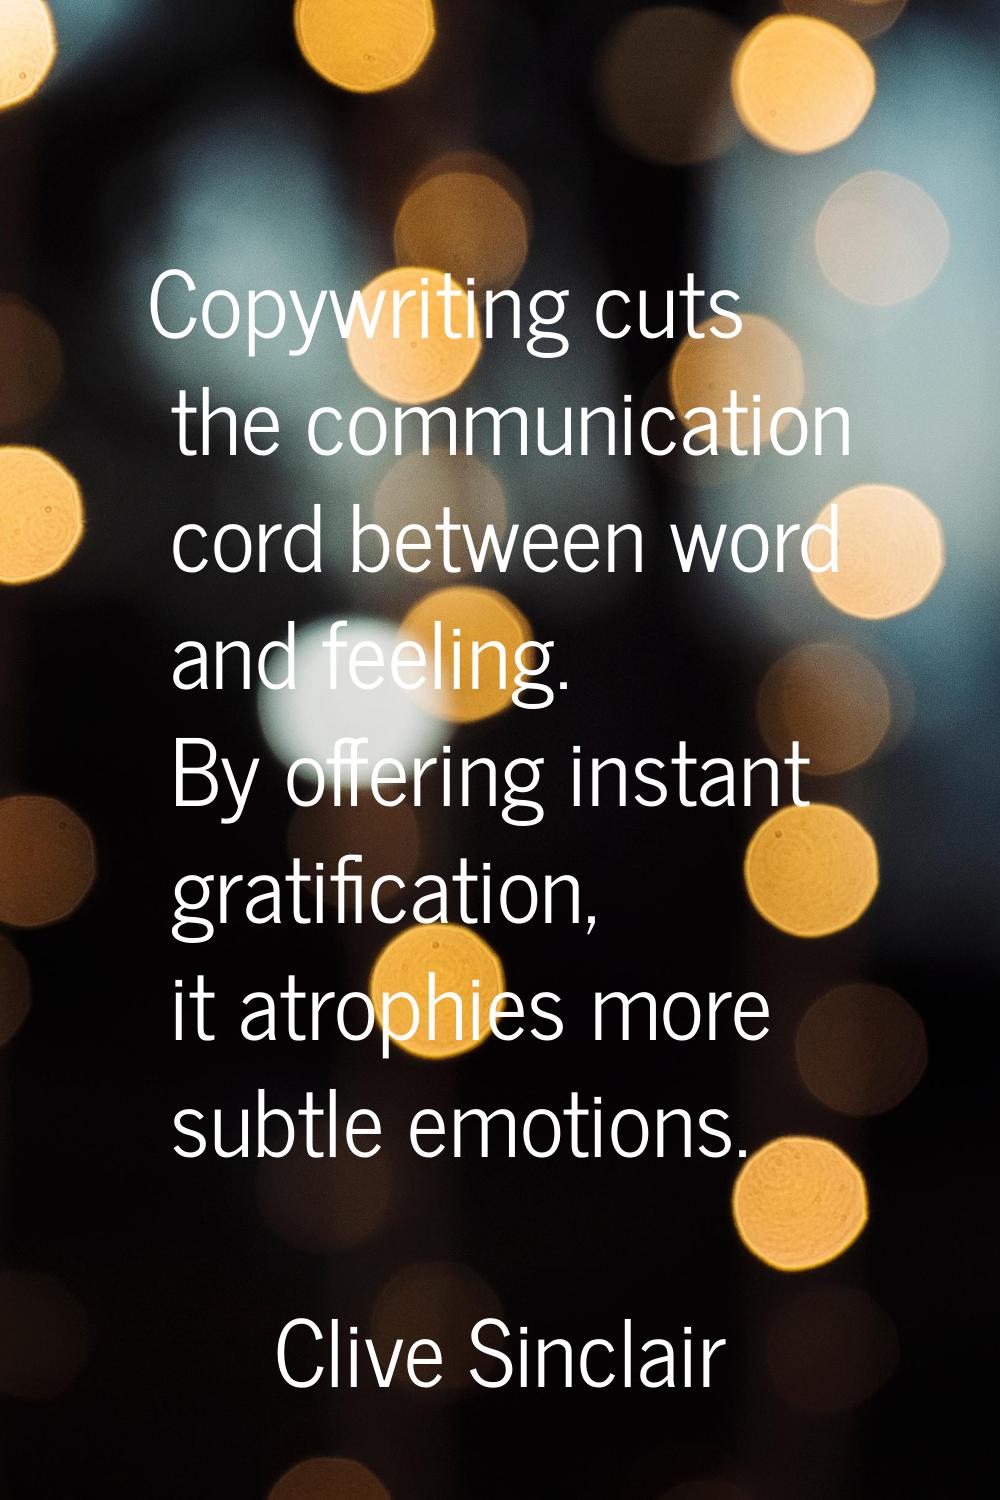 Copywriting cuts the communication cord between word and feeling. By offering instant gratification